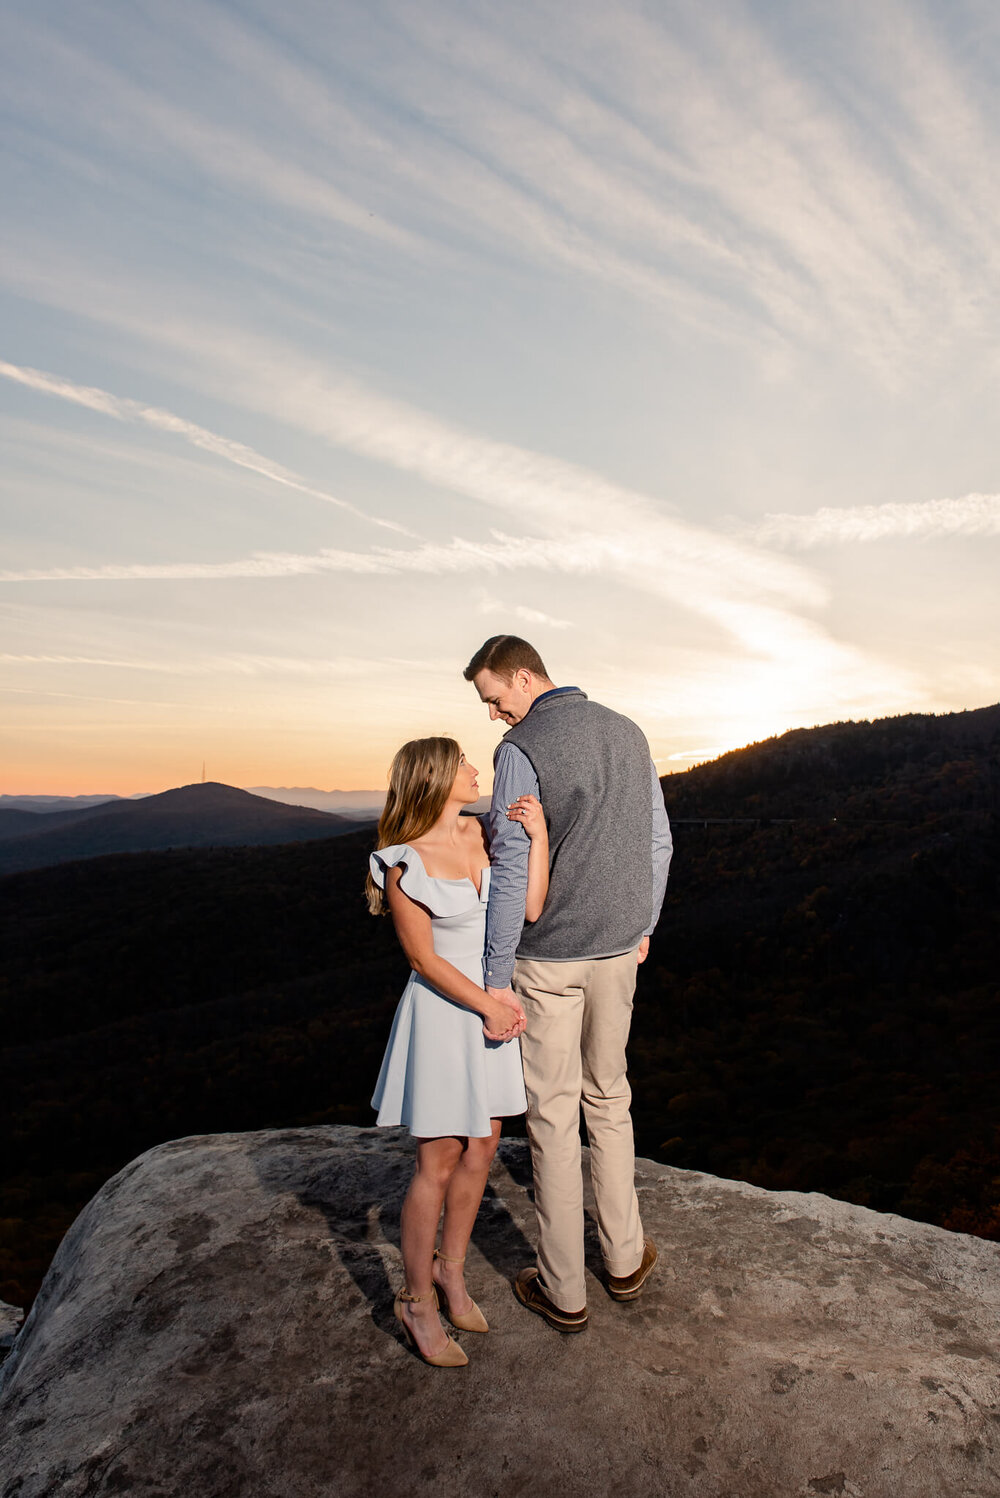 engagement session highlights from nick levine photography on the blue ridge parkway near boone, nc